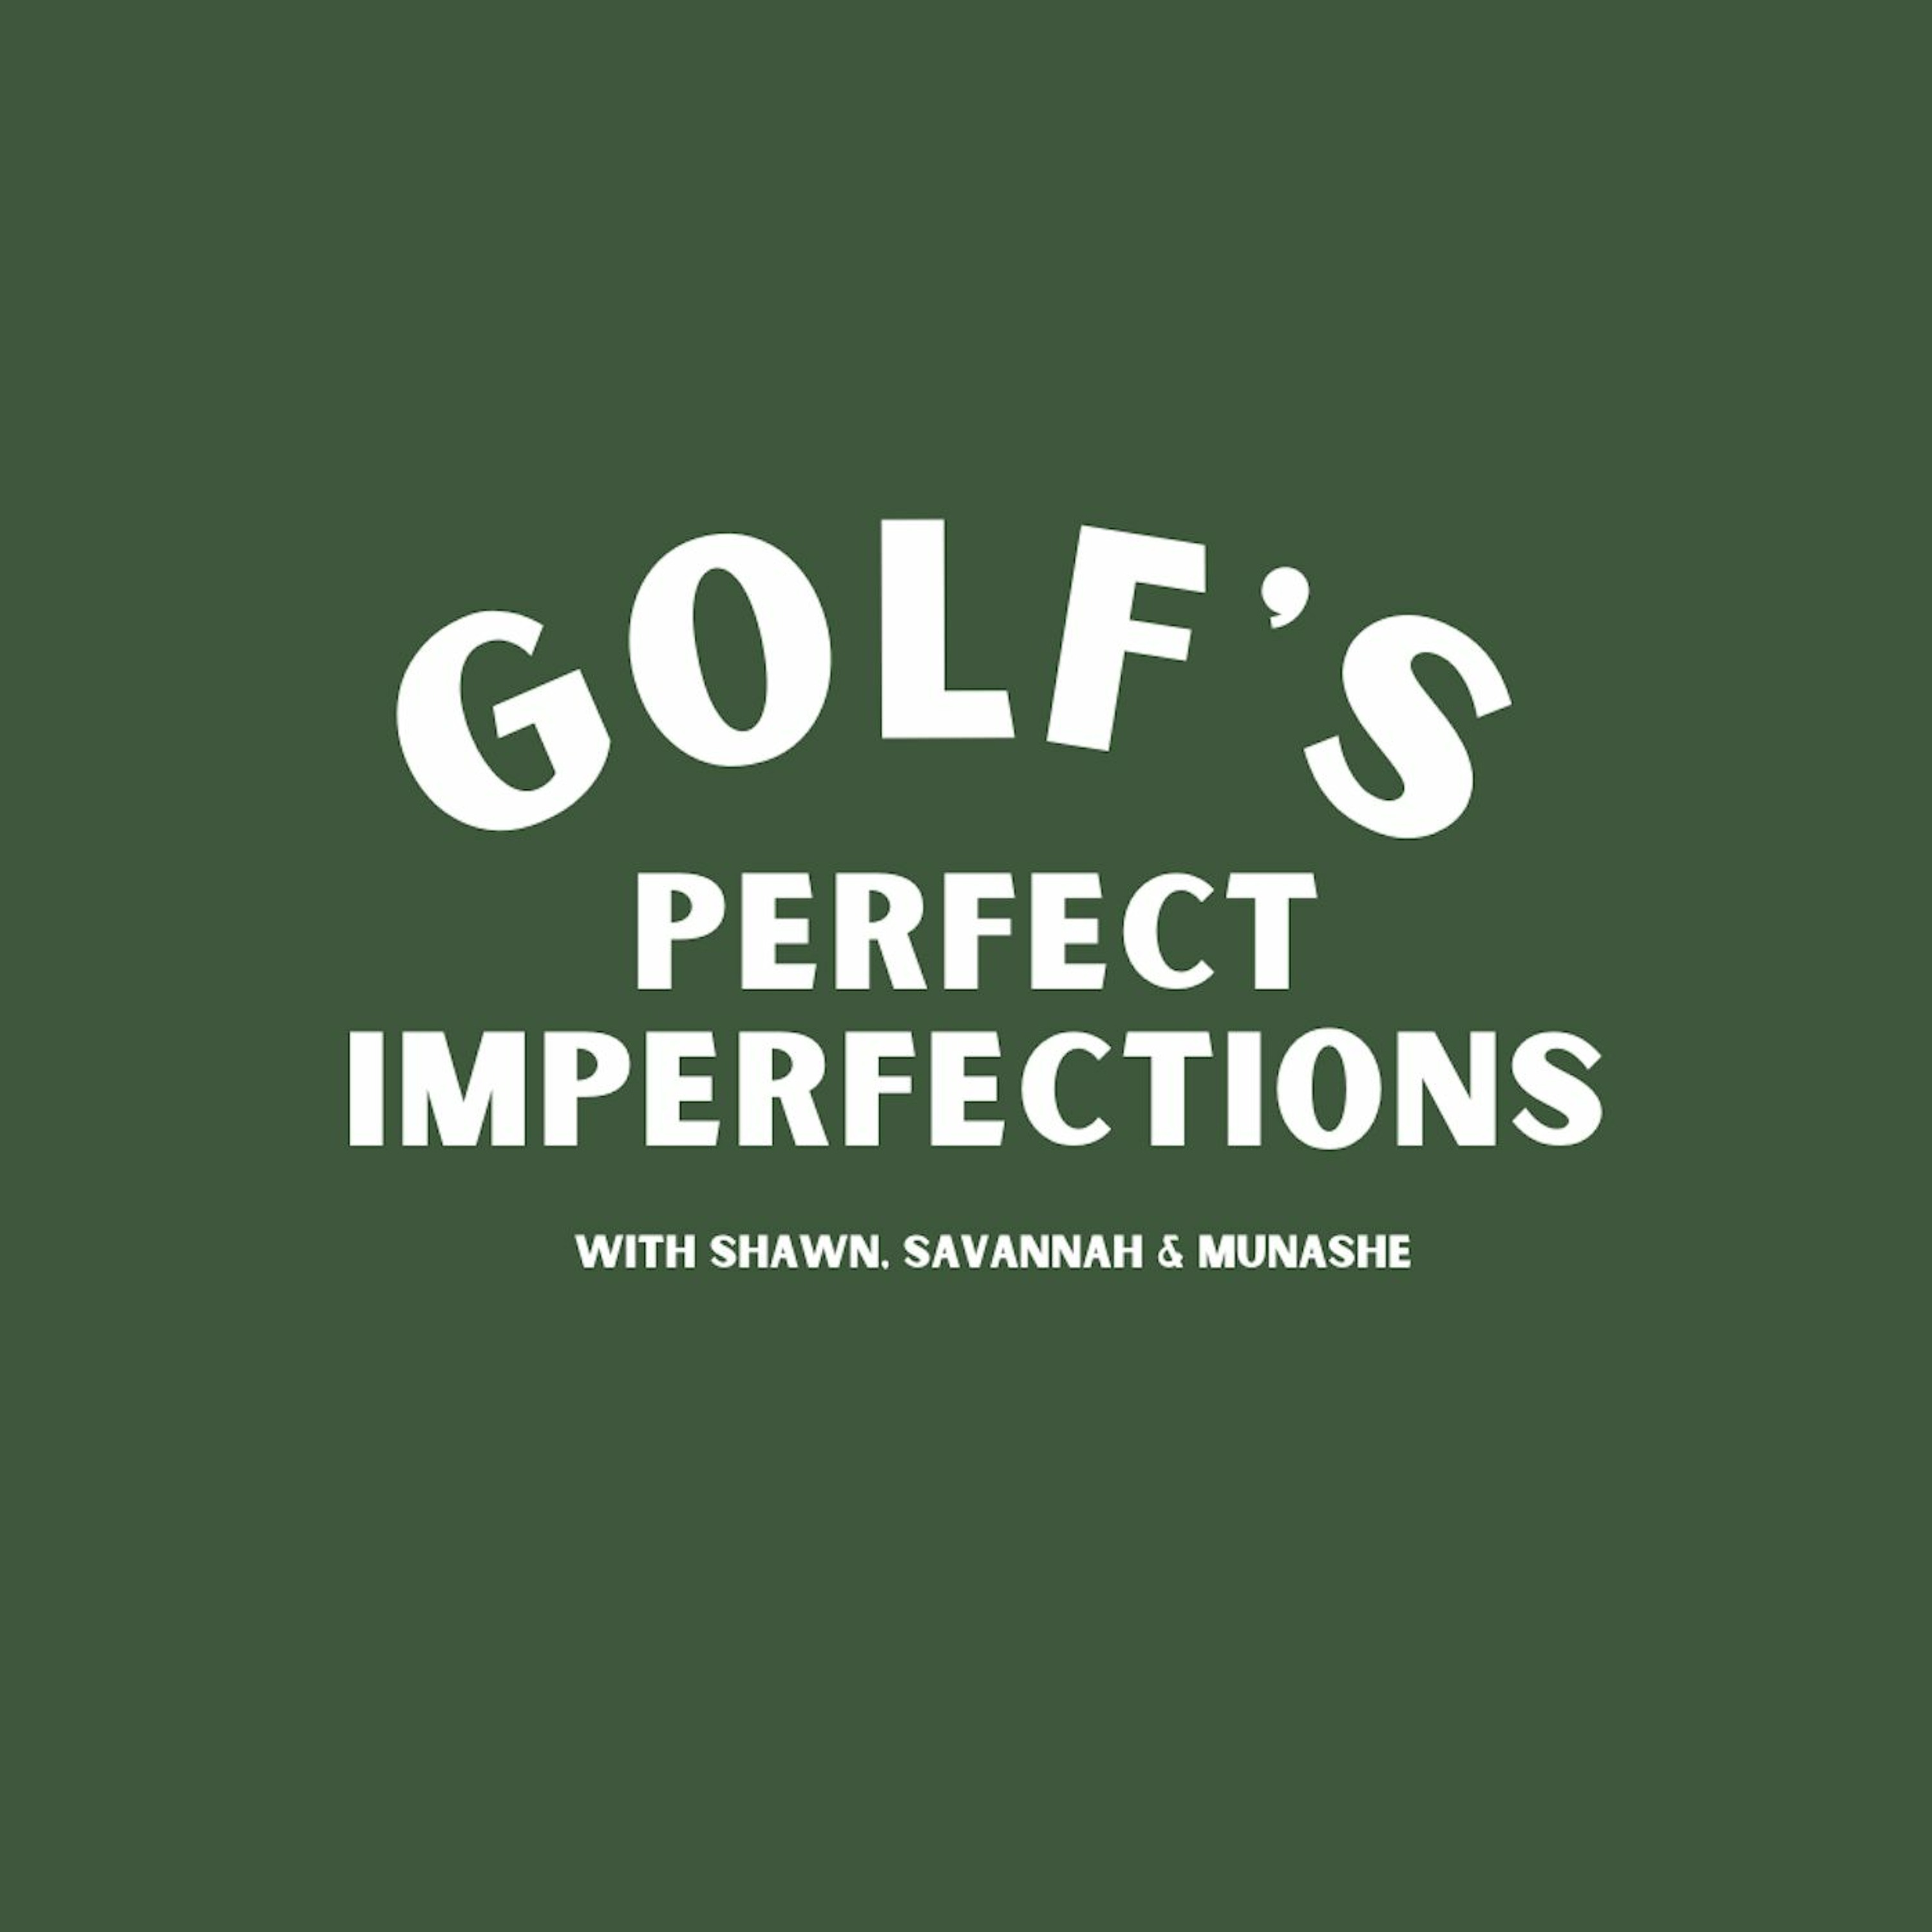 Golf's Perfect Imperfections: Great week in Carlsbad,CA with the nice folks at Cobra Golf HQ